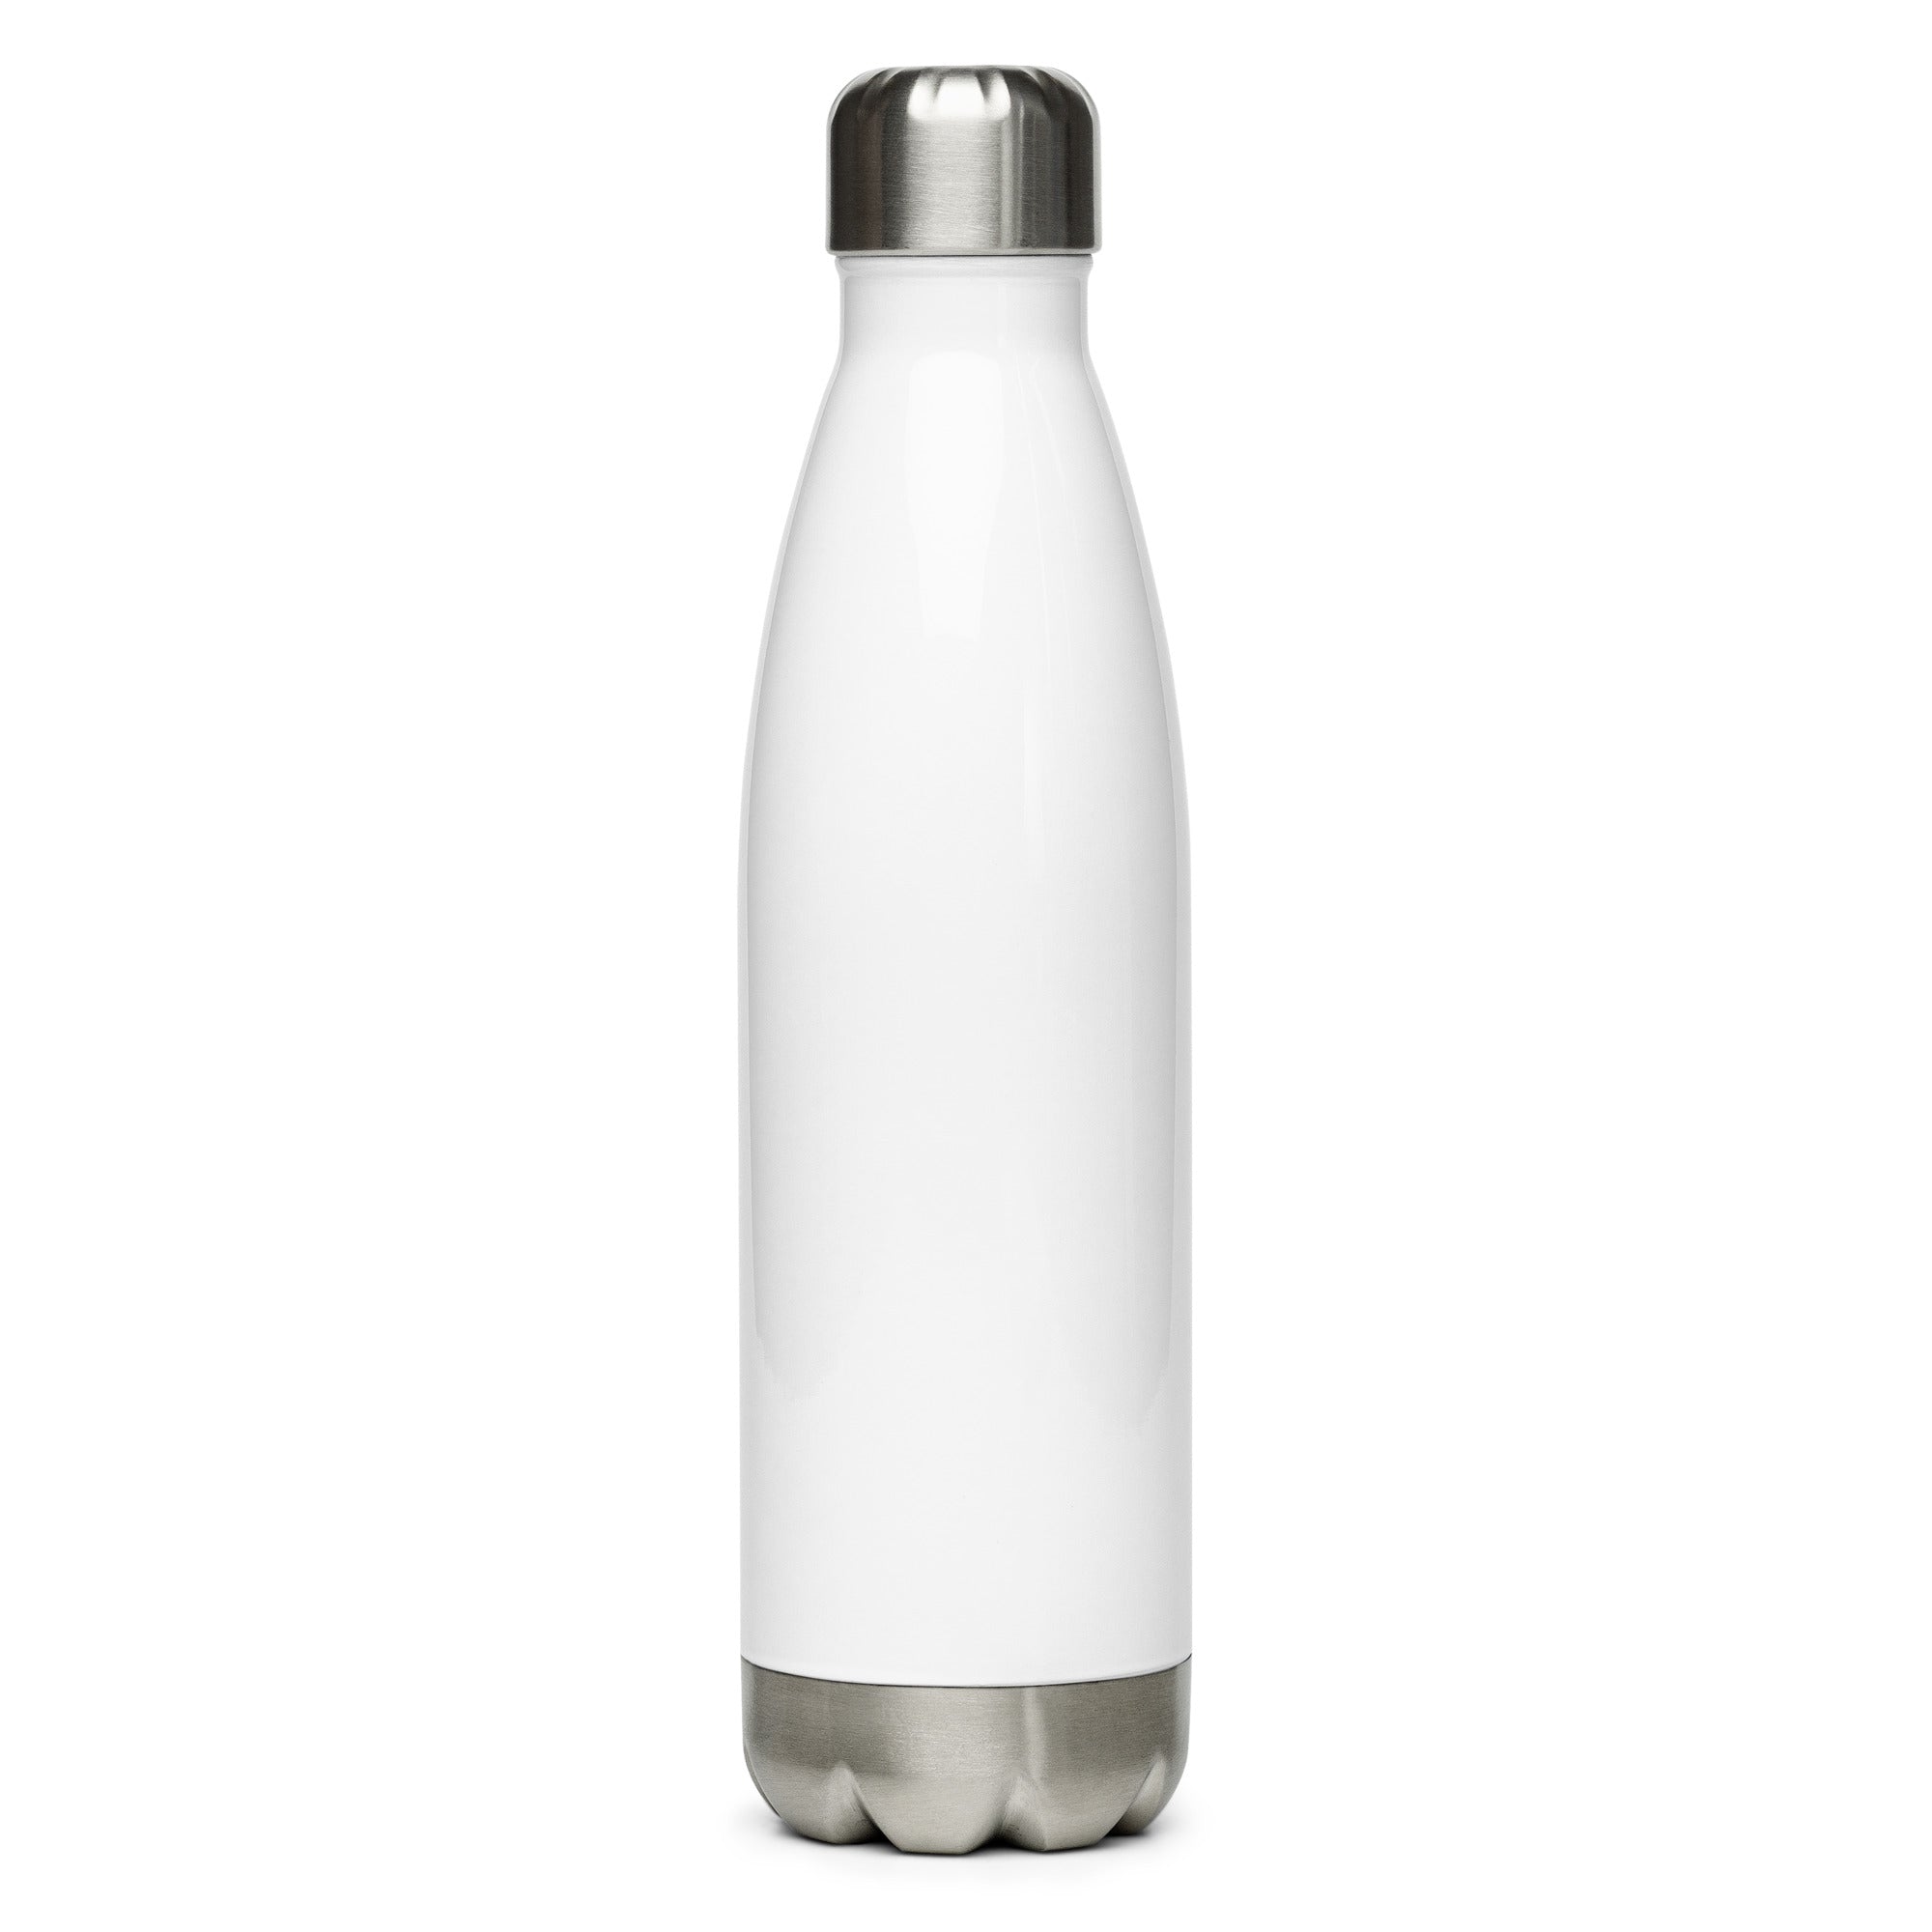 TOCS Stainless Steel Water Bottle